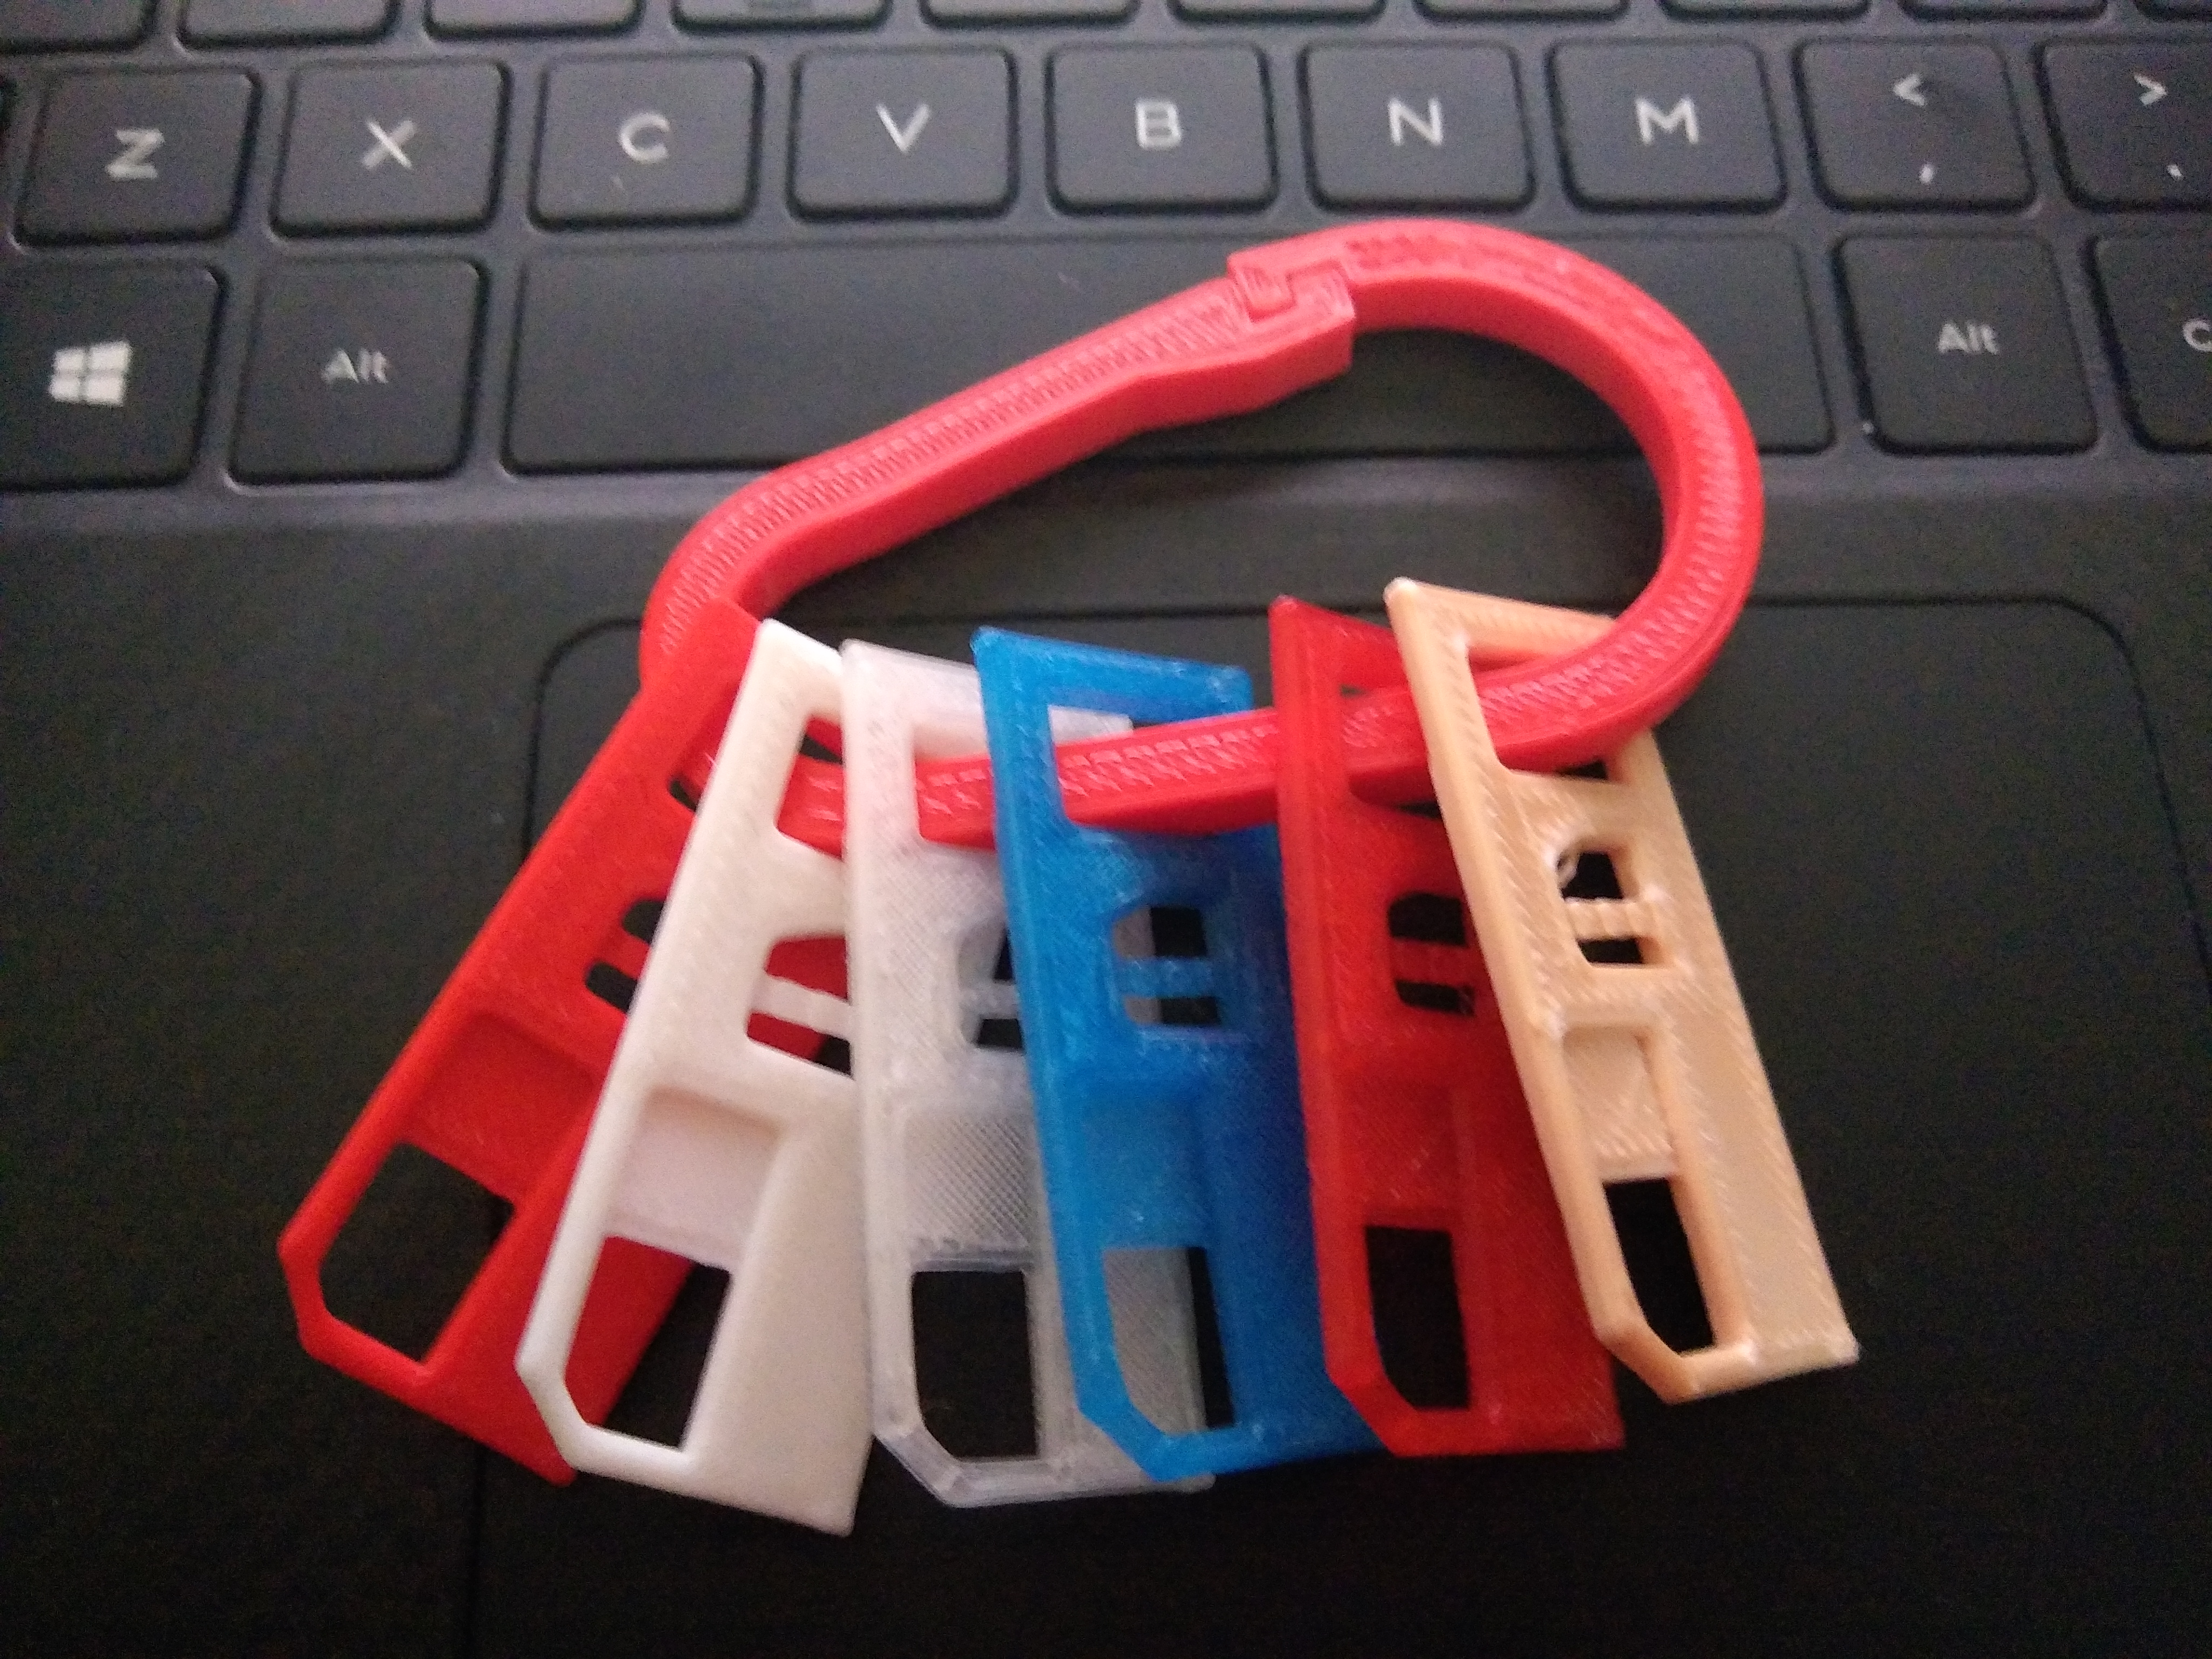 Shows a 3d printed carabiner containing 6 differently 3d printed colored tags